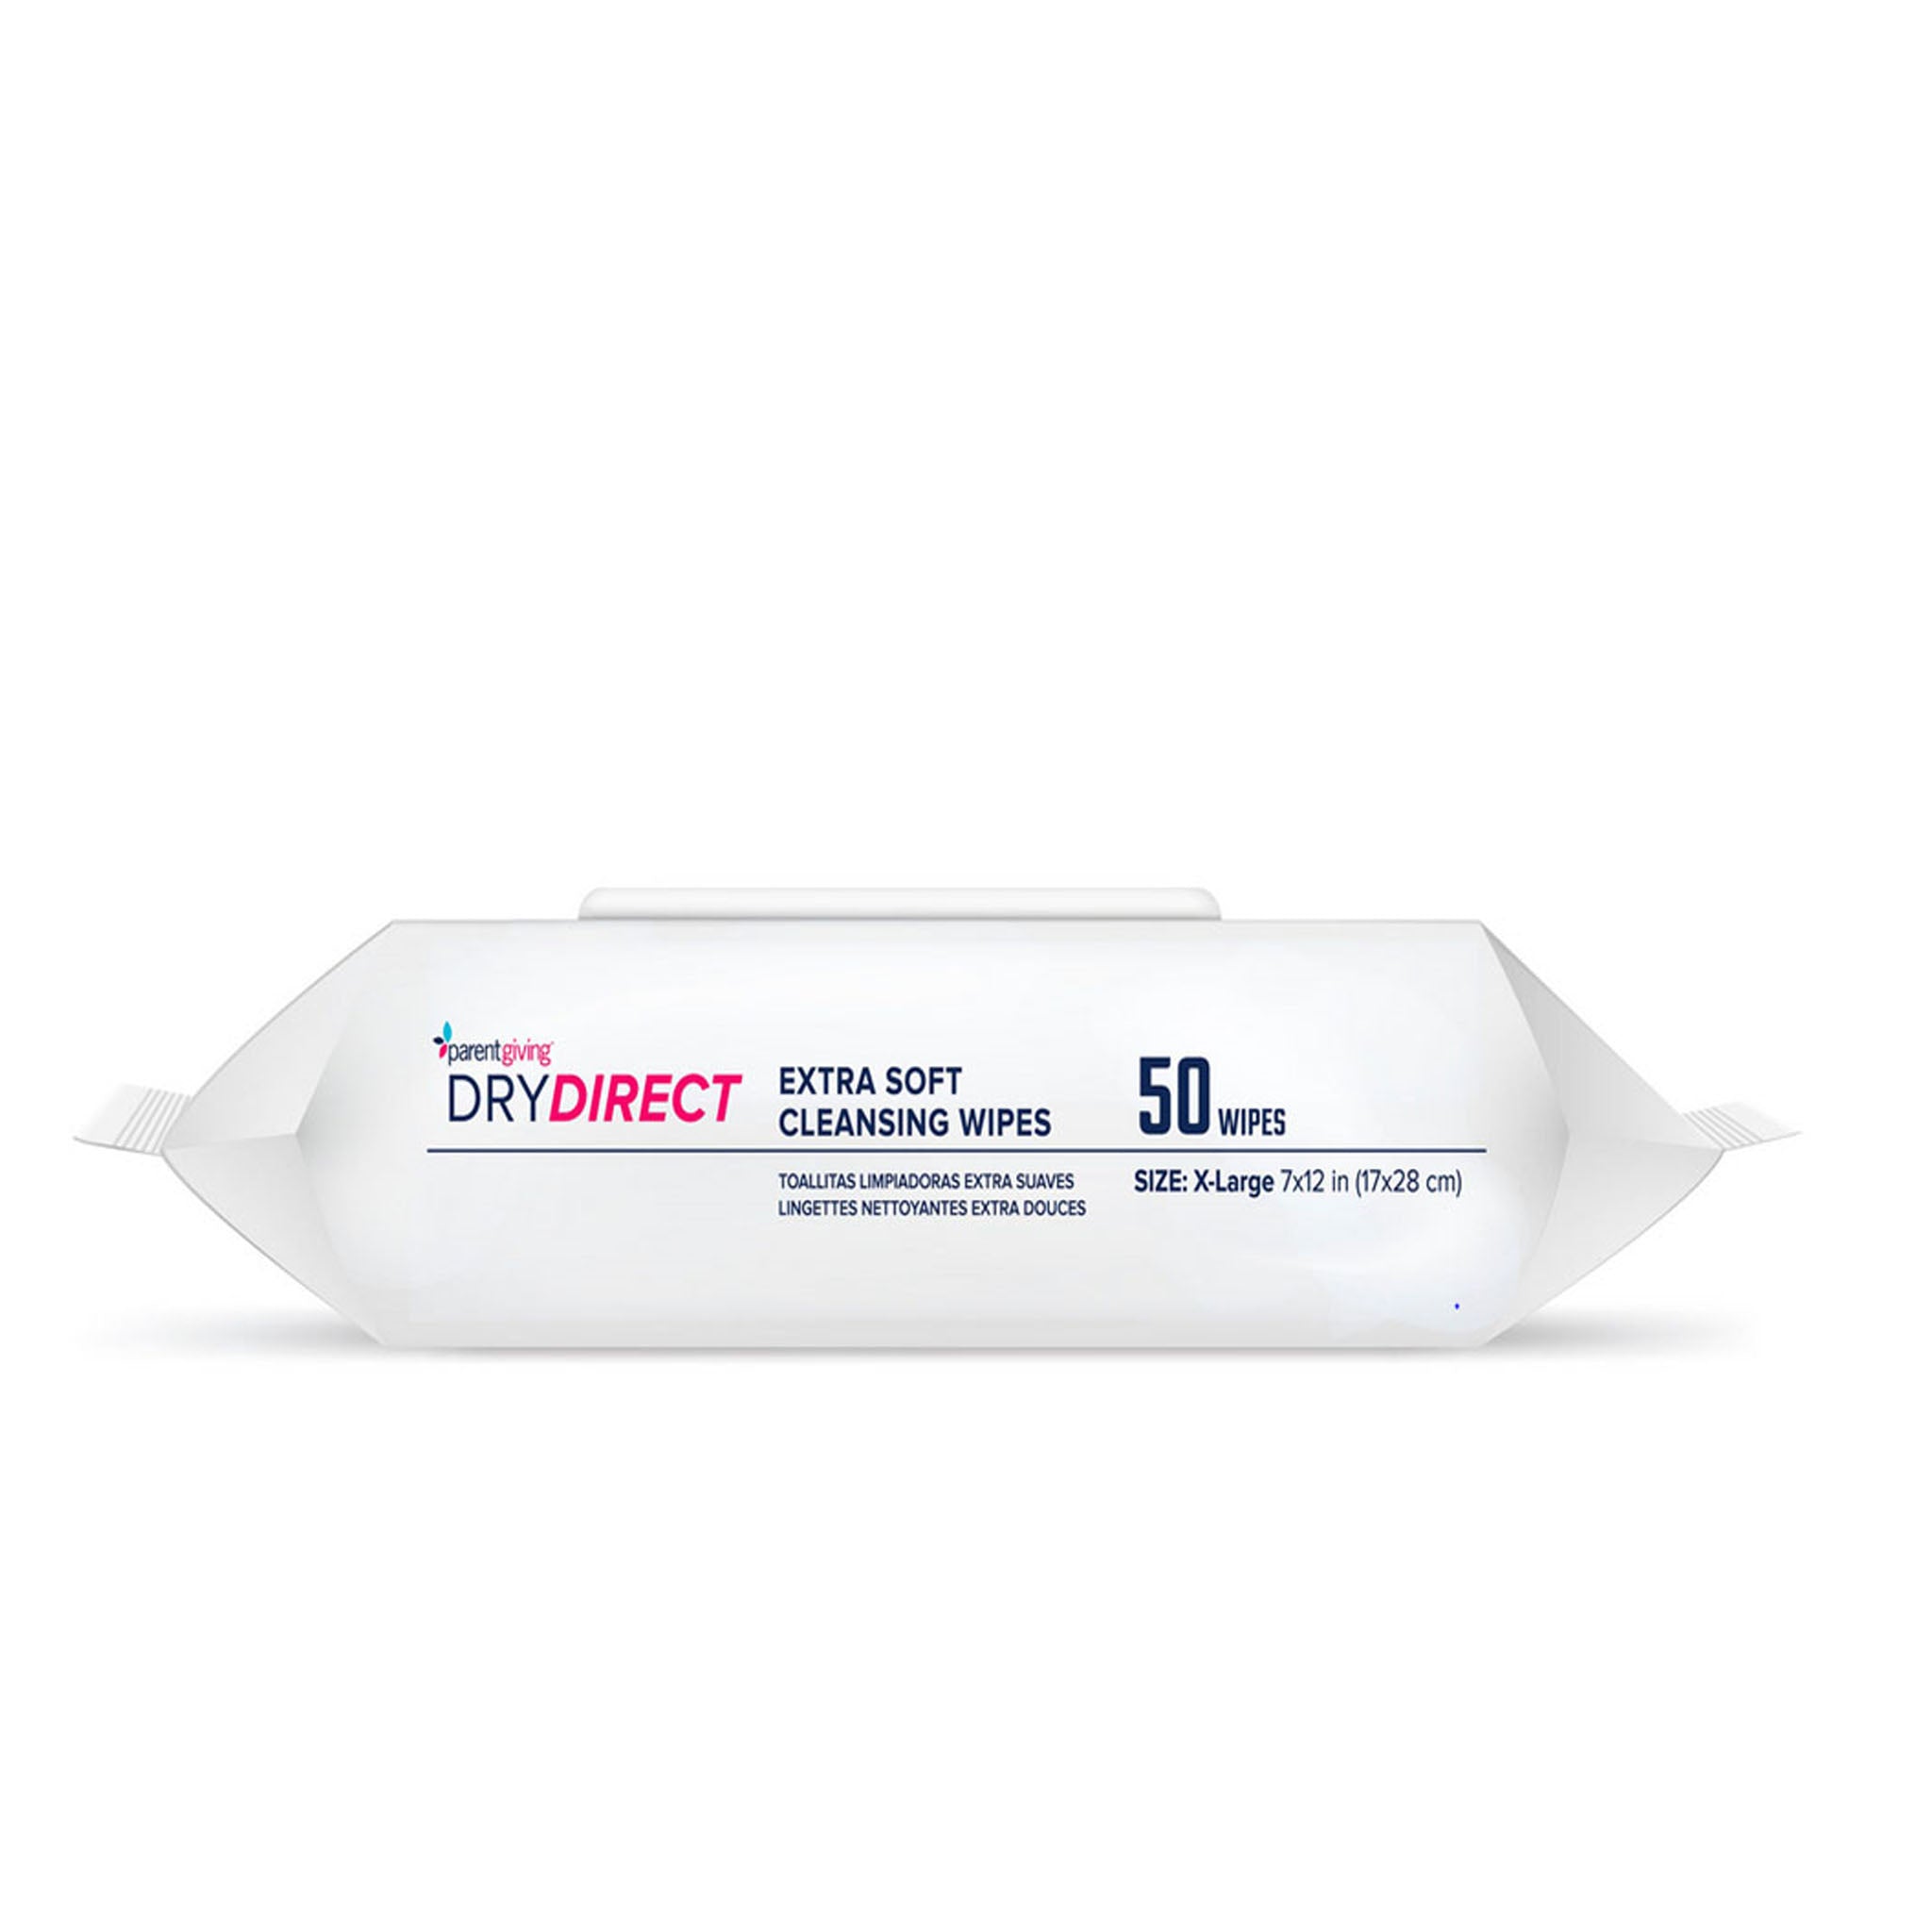 Dry Direct Extra Soft Cleansing Wipes